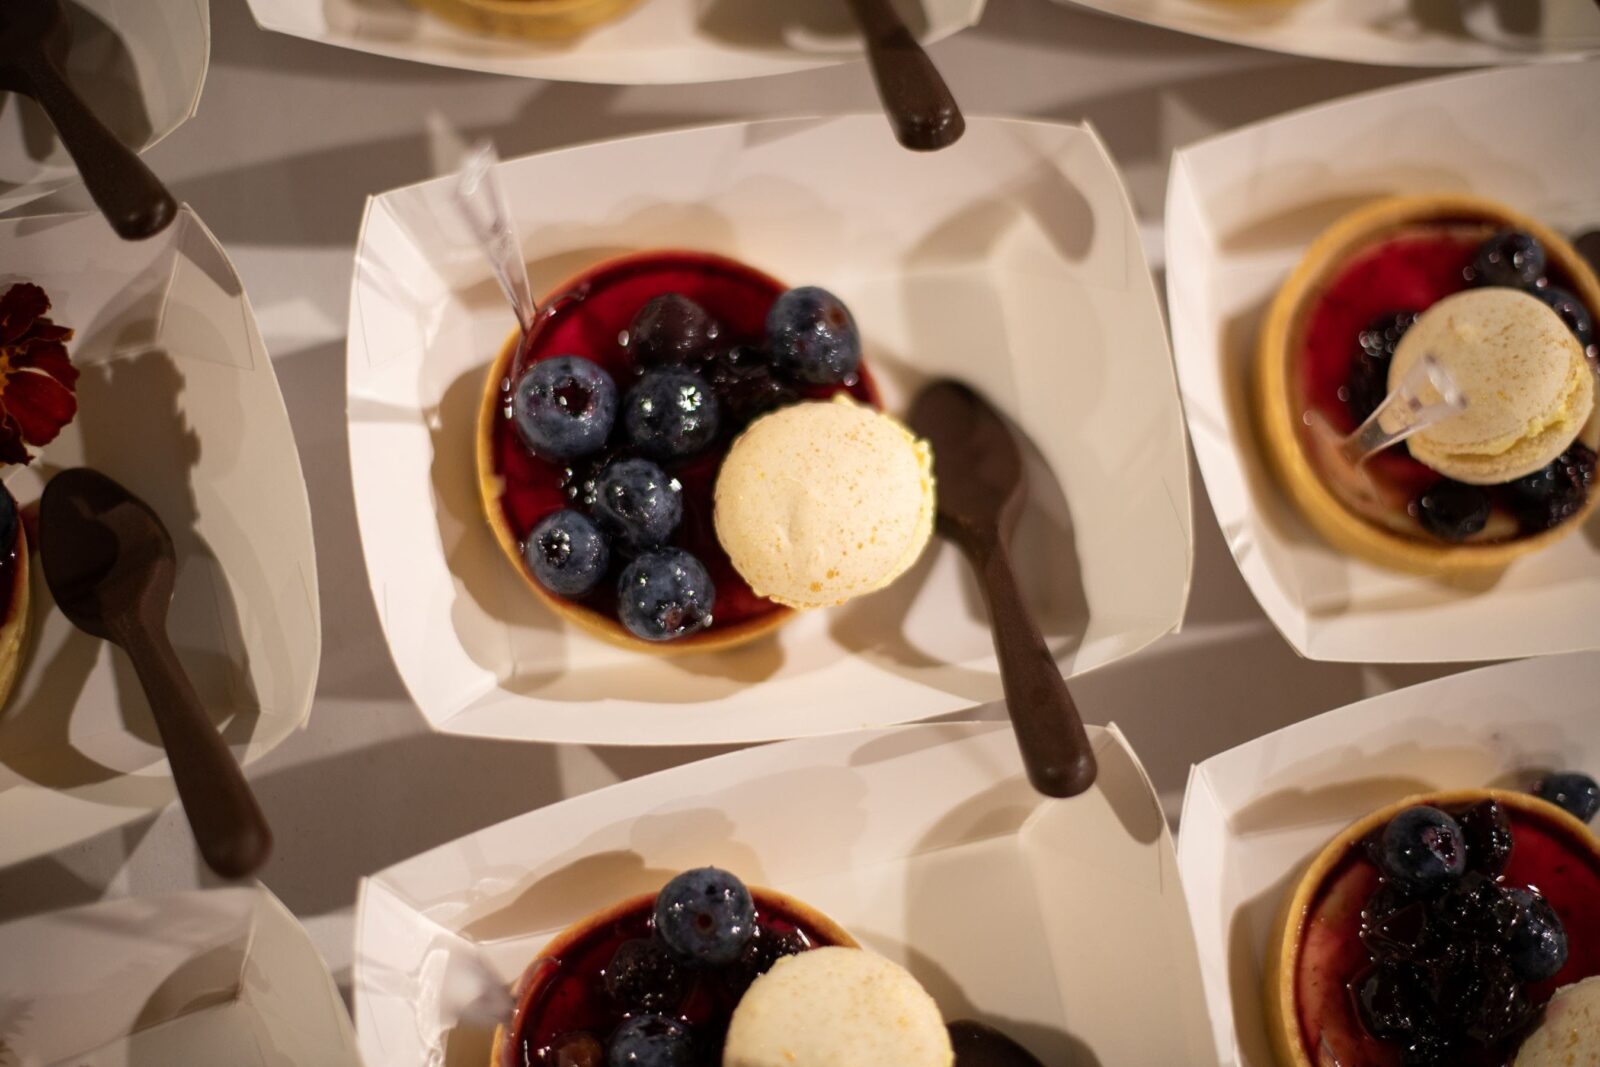 Desserts created by local Chef Kelly Voss for the 2022 North Burnett gourmet dining event